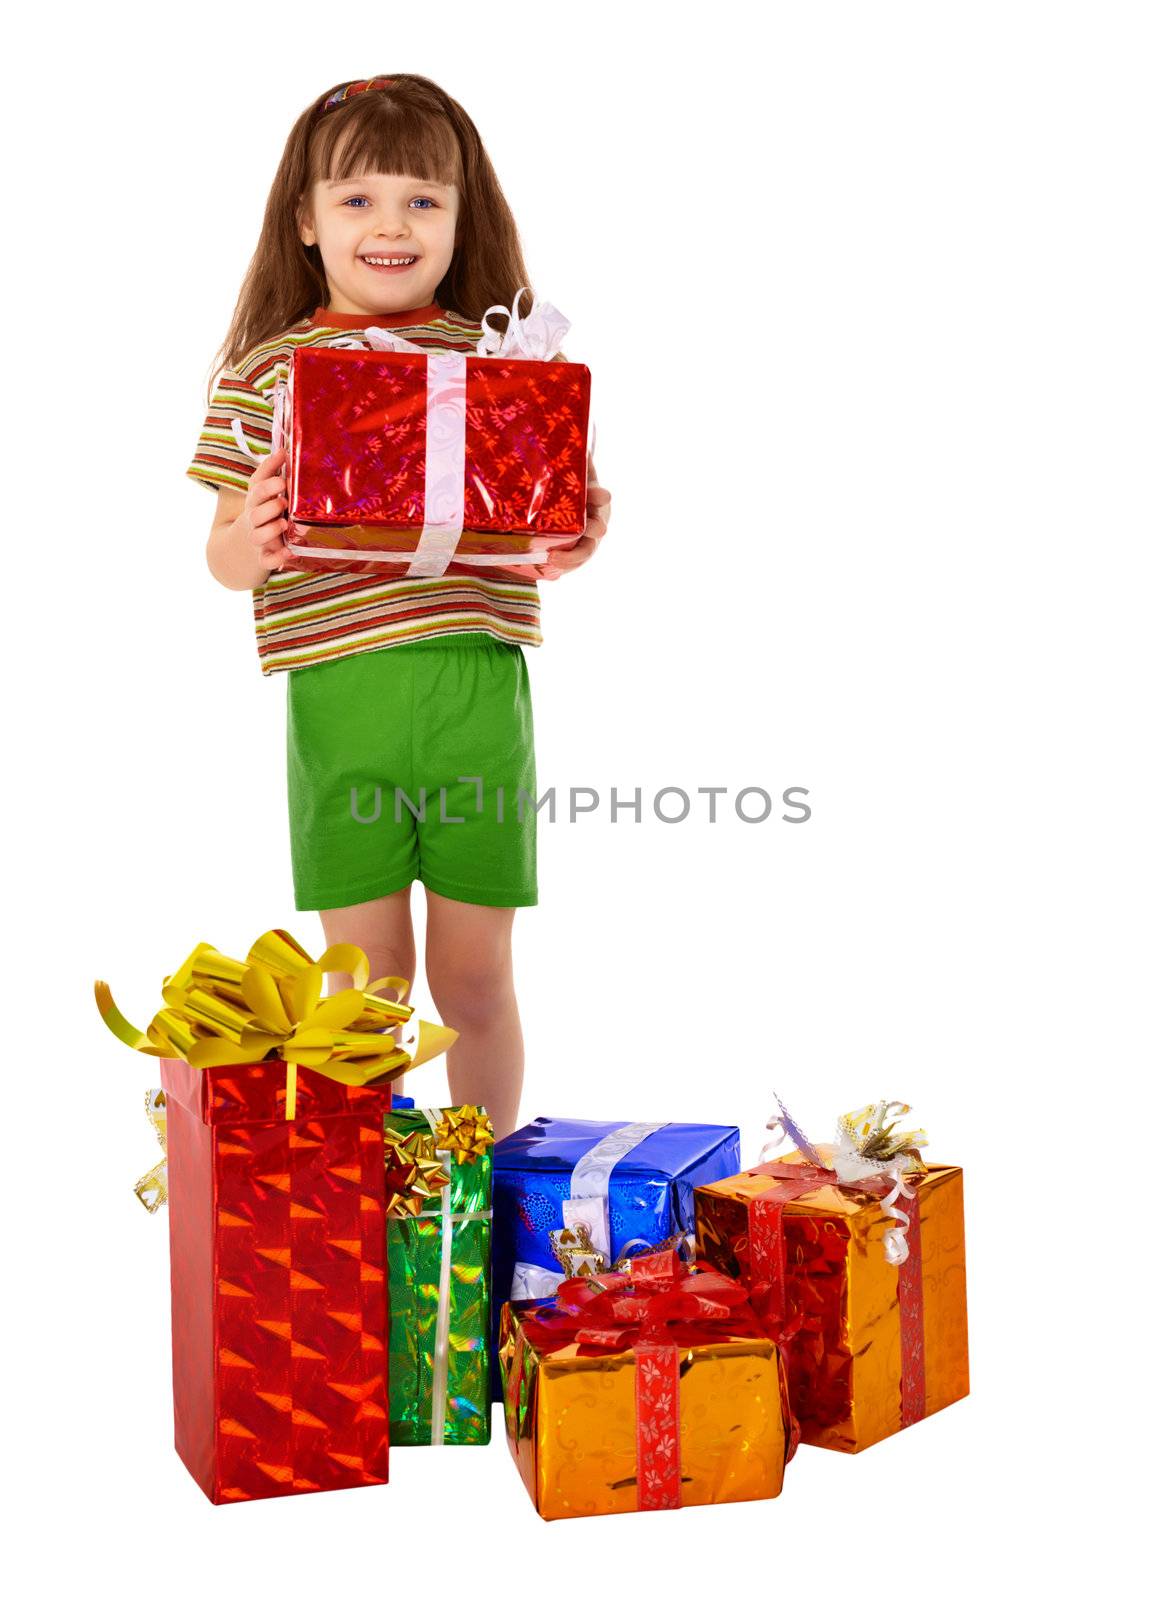 The girl got a lot of gifts for the holiday